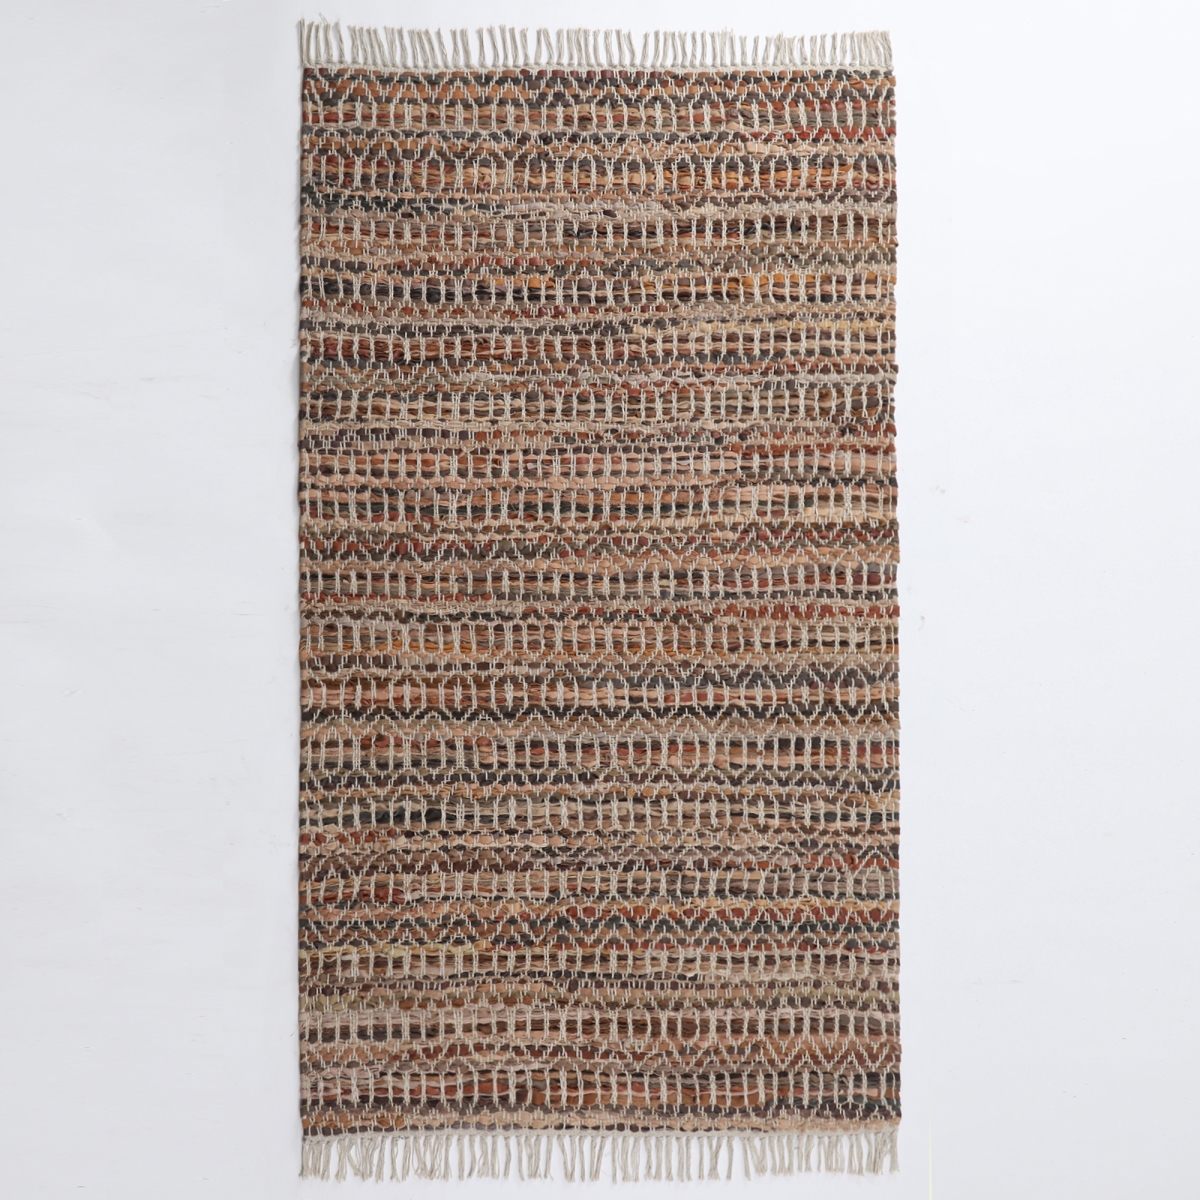 Whtxr640-l 4 X 6 Ft. Handwoven Leather & Cotton Rug, Coffee & White